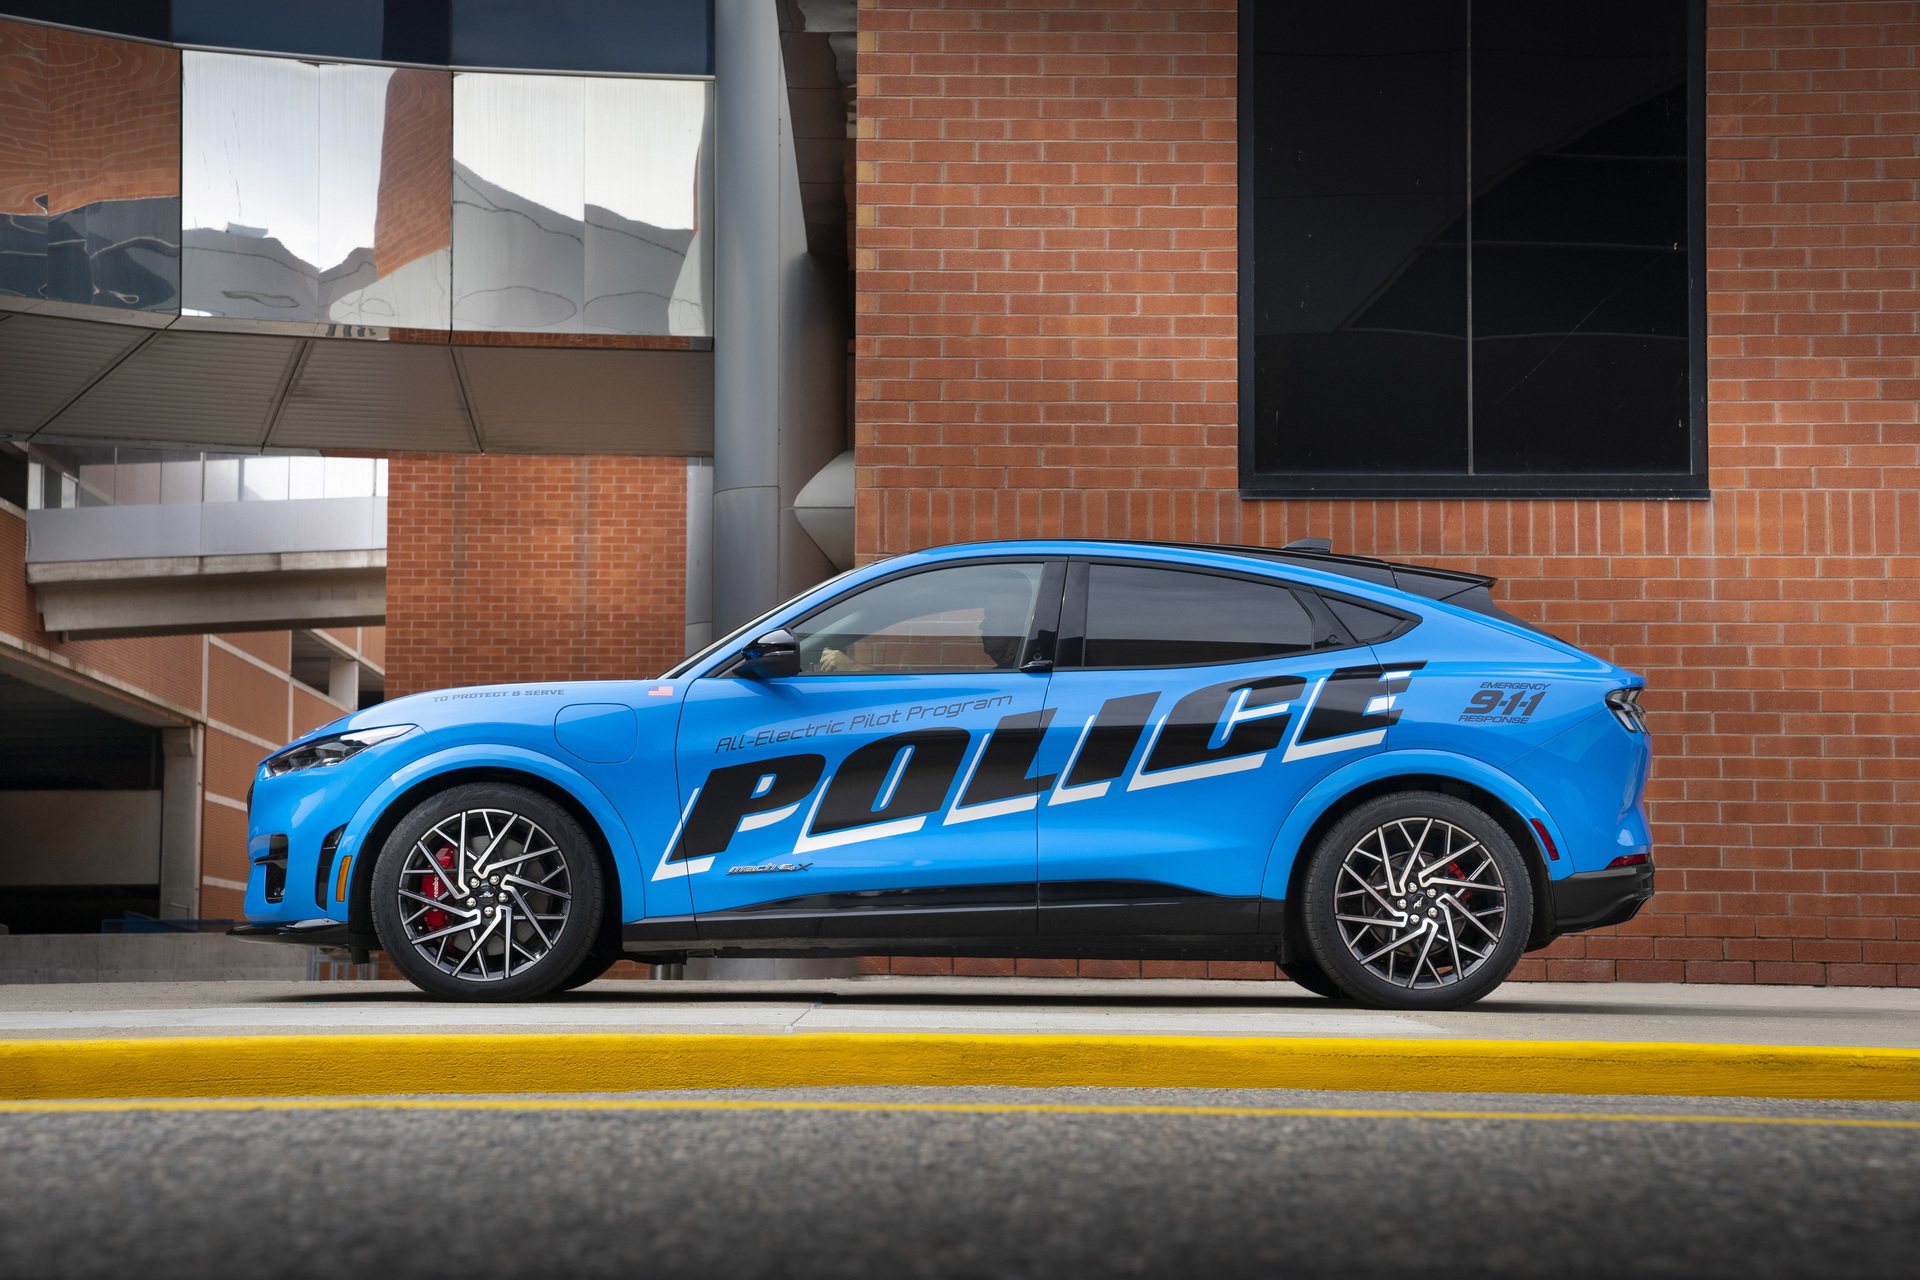 2022 Ford Mustang Mach E Police vehicle - 184 Ford Mustang Mach-E GTs for New York City Government fleet